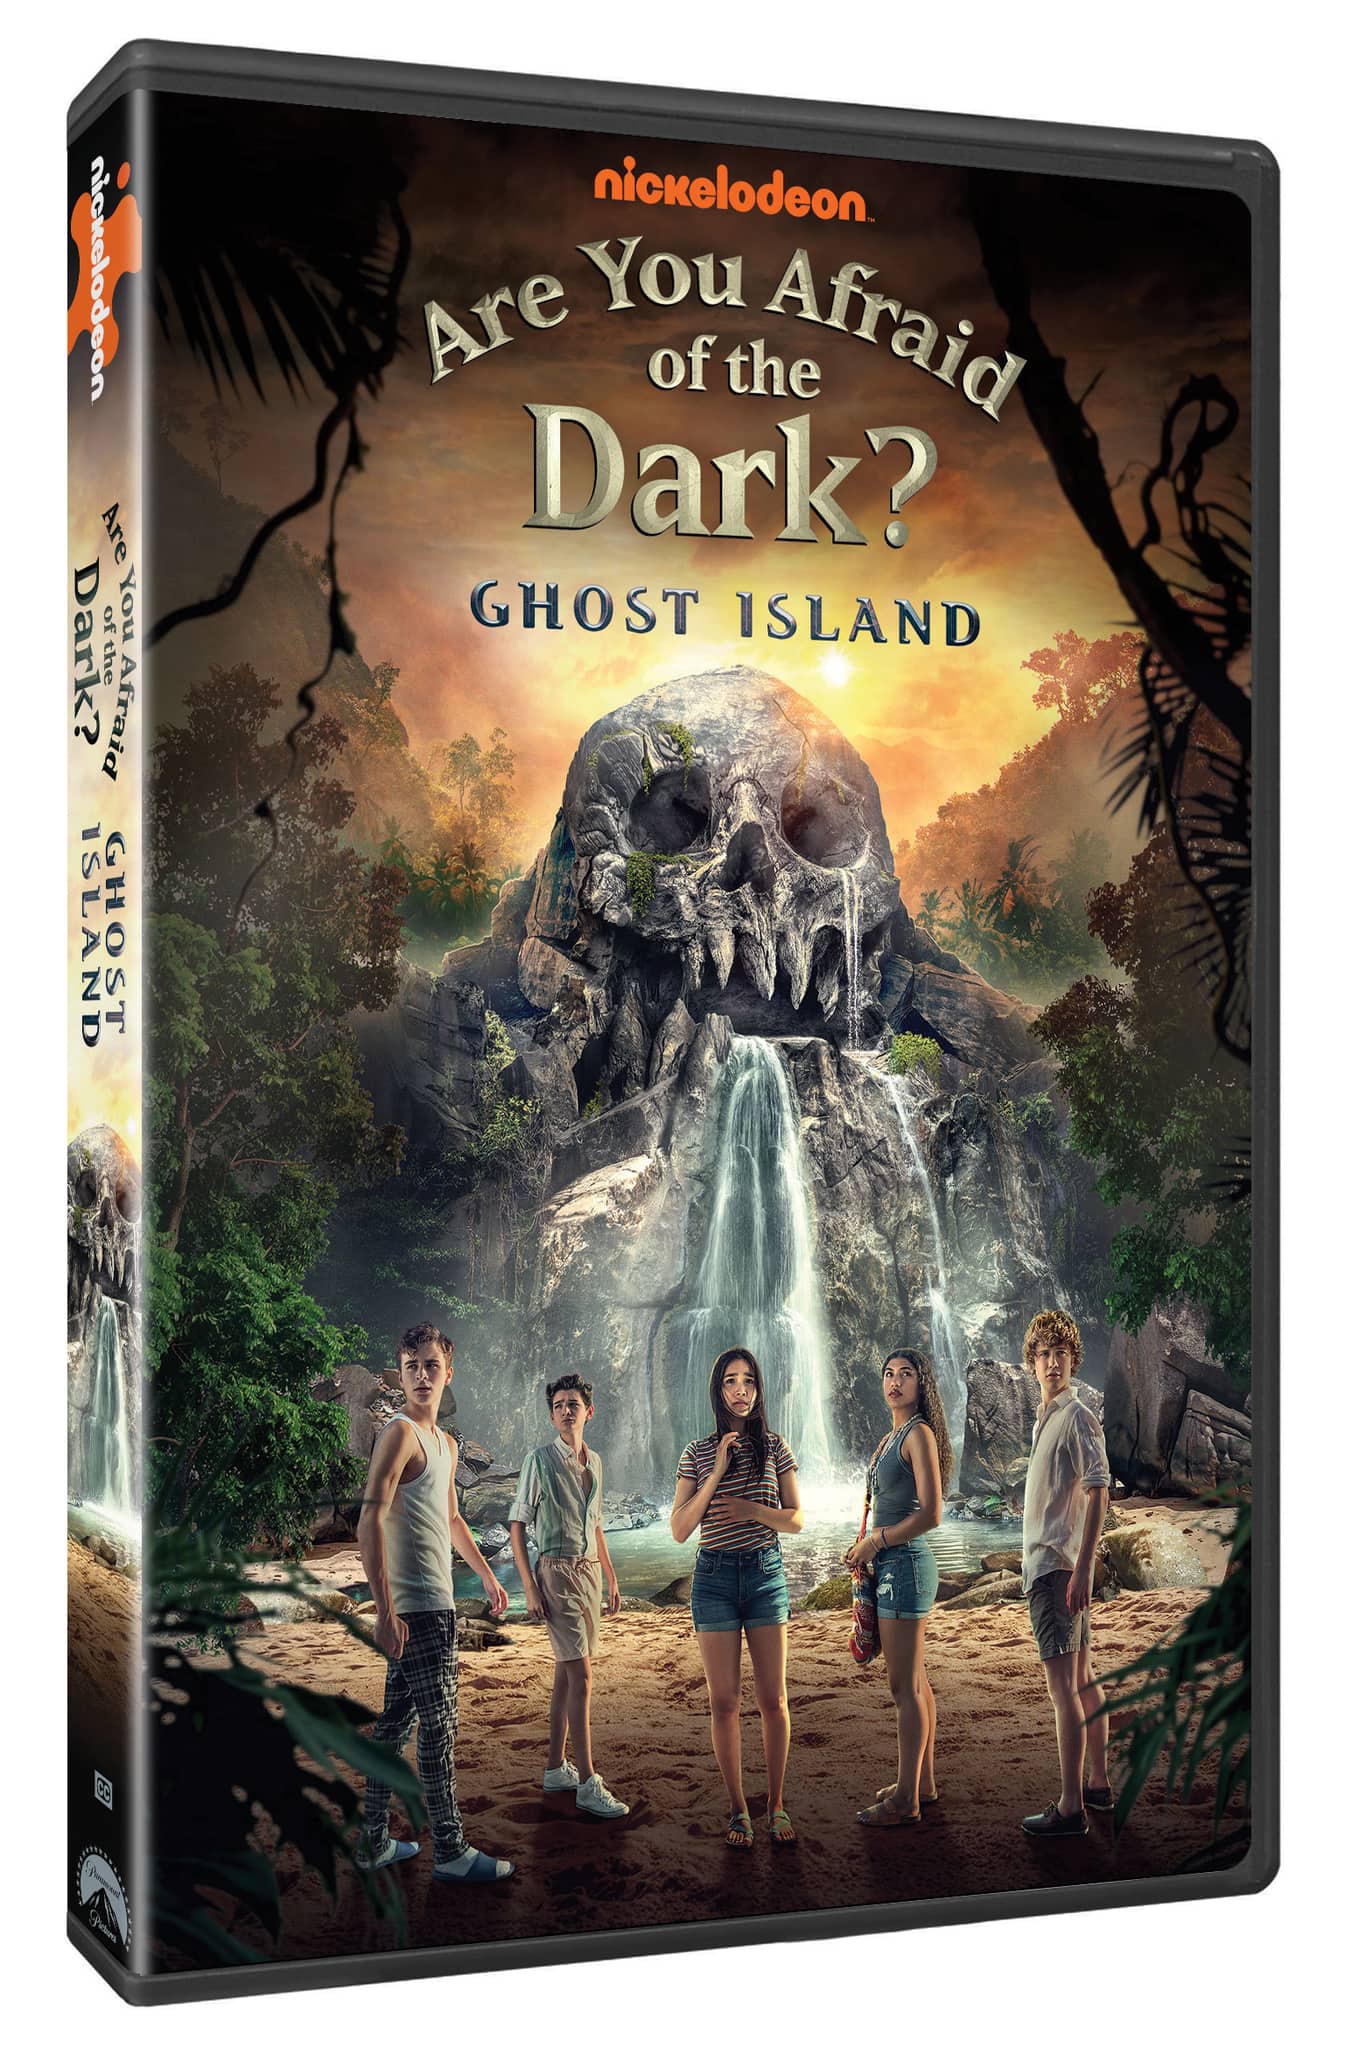 Are You Afraid of the Dark Ghost Island DVD Giveaway